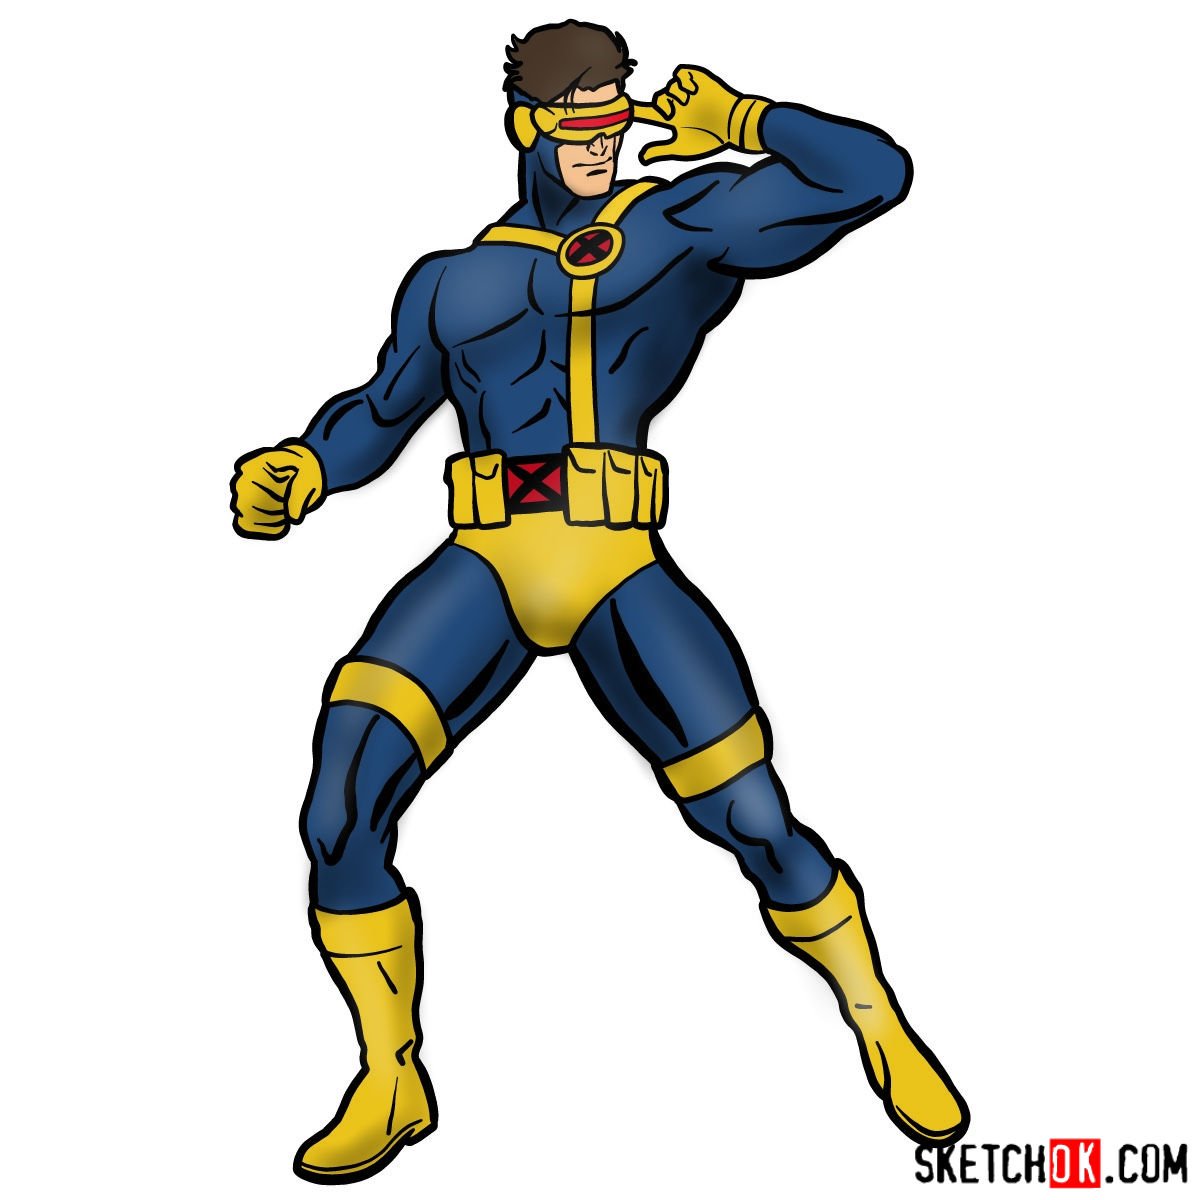 How to draw Cyclops from X-Men